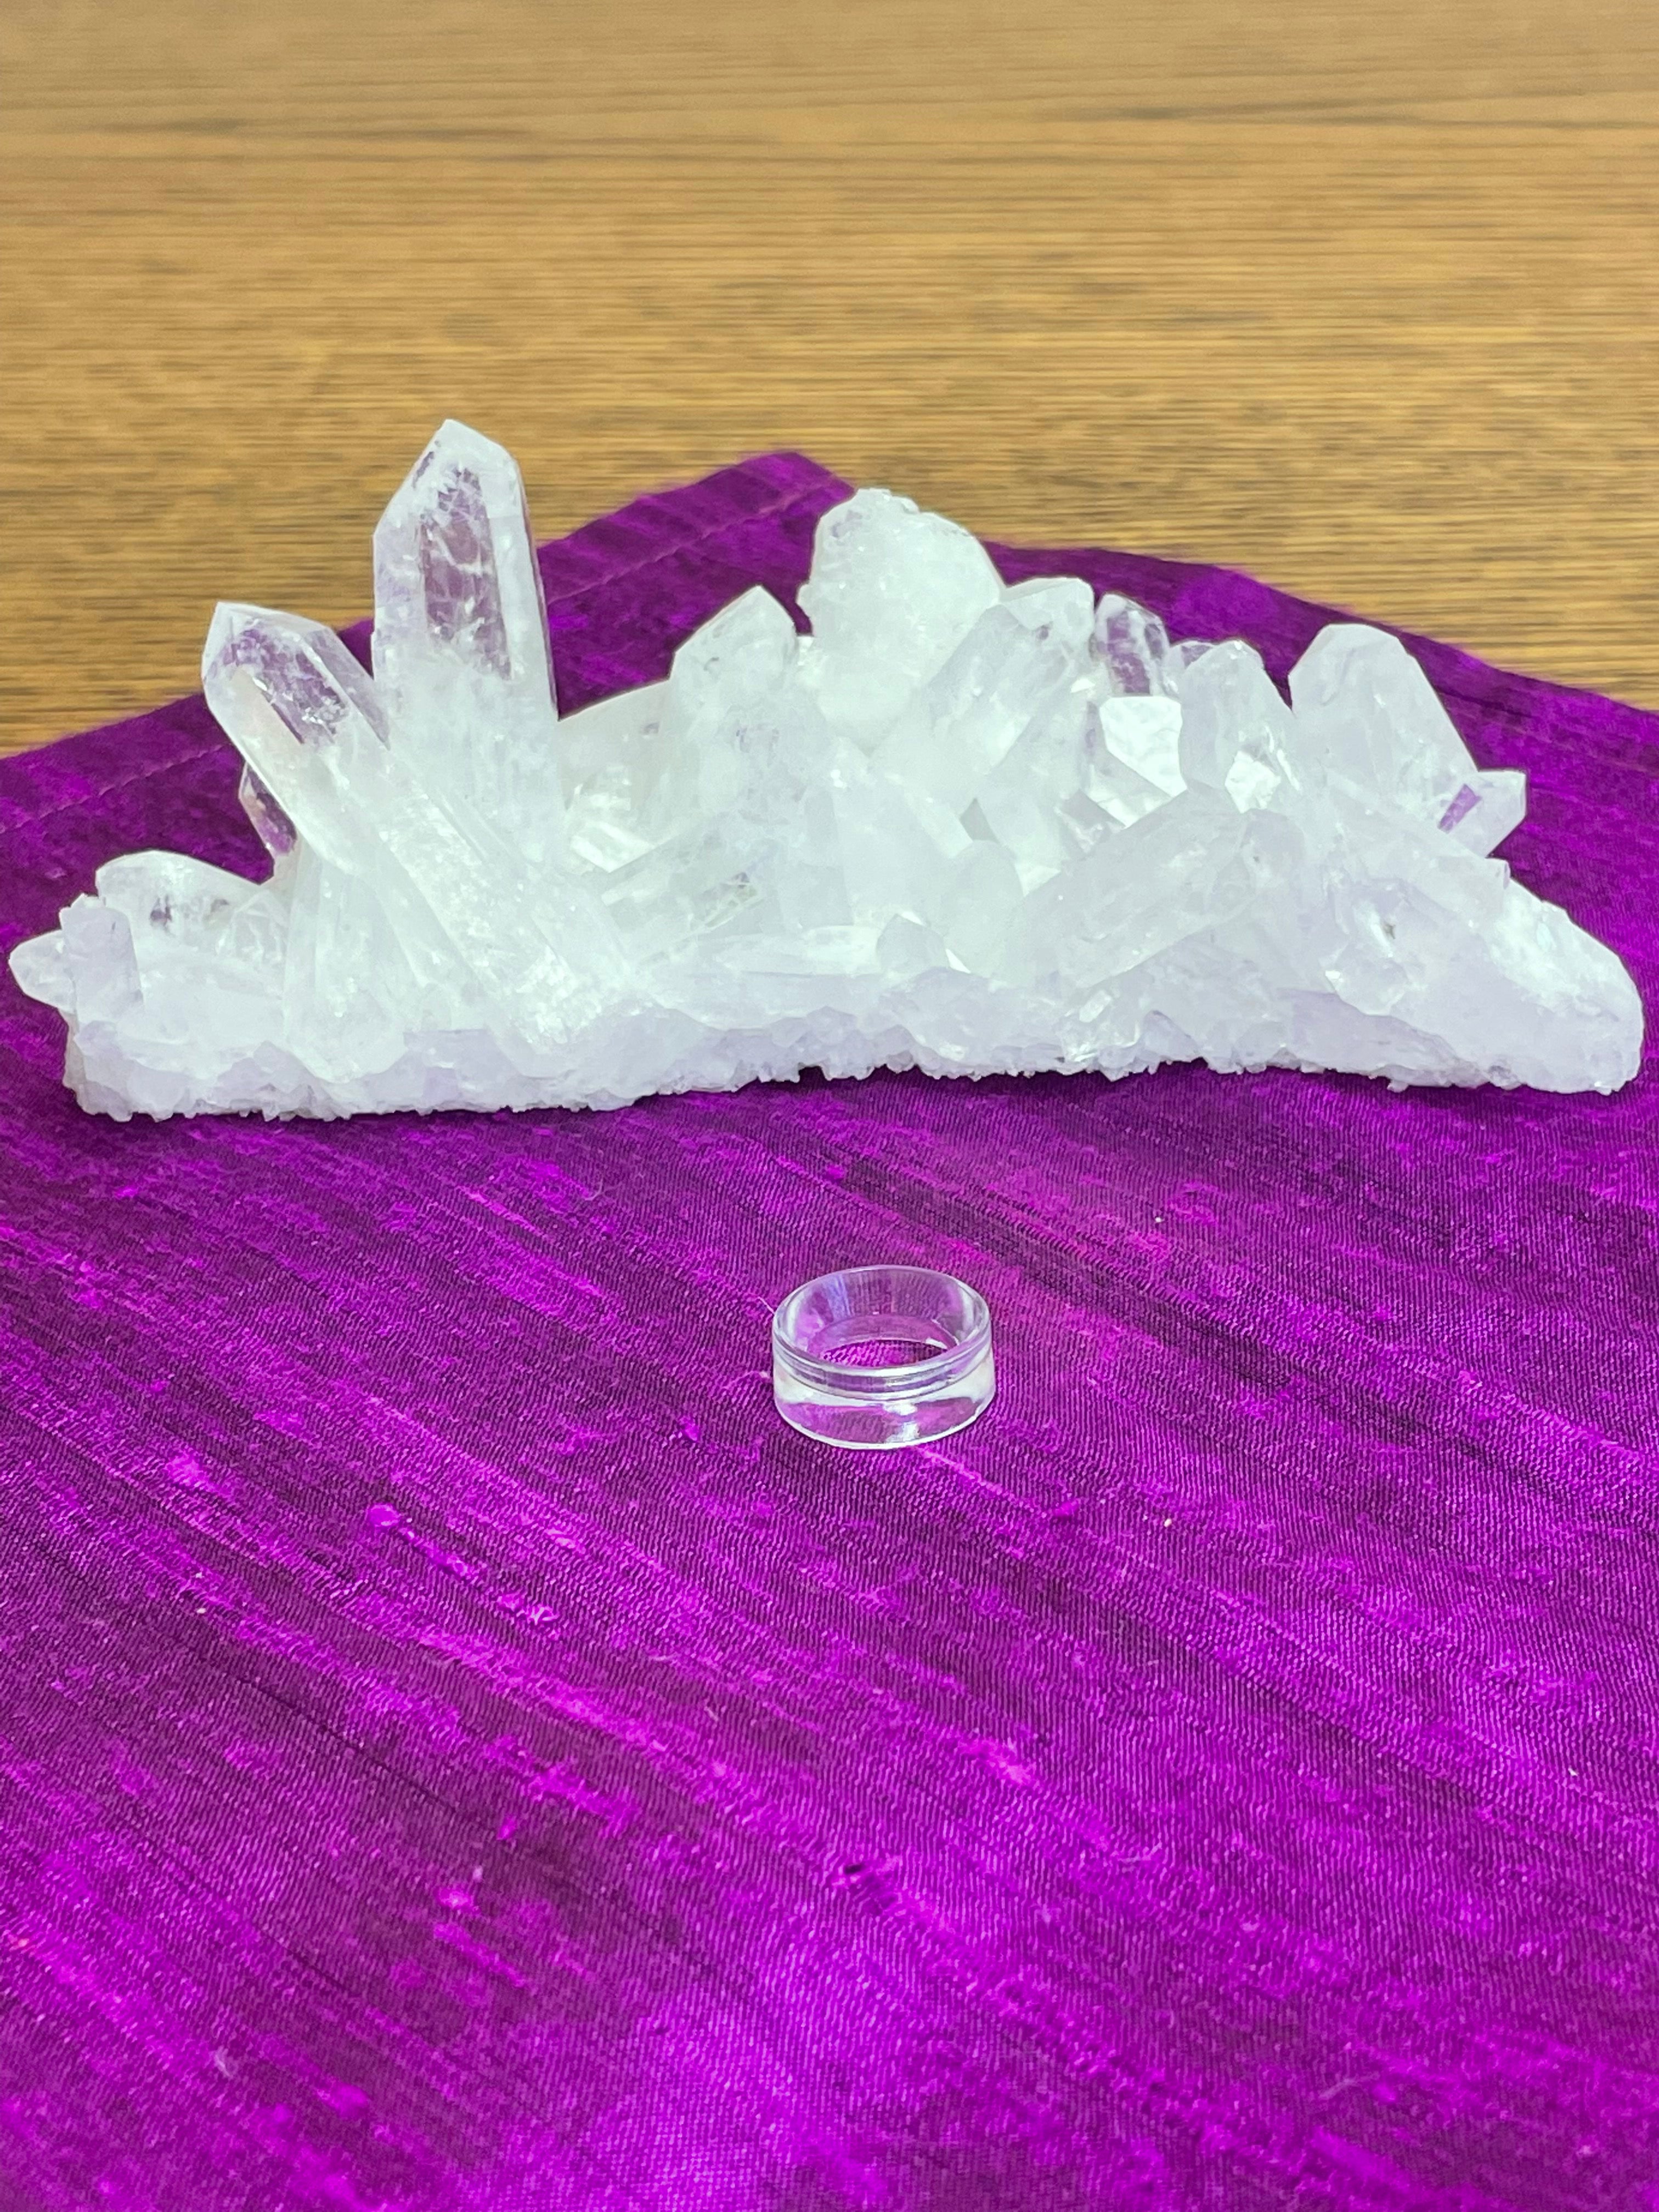 Your basic clear plastic ring to display crystal spheres or eggs. Use to keep your crystal spheres and eggs in place, rather than rolling off your altar, table or nightstand - lol.  This is the smallest size I offer at approximately 0.6"x0.24" (d/h). The 3rd photo shows all three available sizes.  Check out my crystal spheres and my ruby-in-matrix eggs and Judy Hall's The Crystal Bible Books - they are awesome! Cost is 25 cents and can only be purchased as an add-on item.